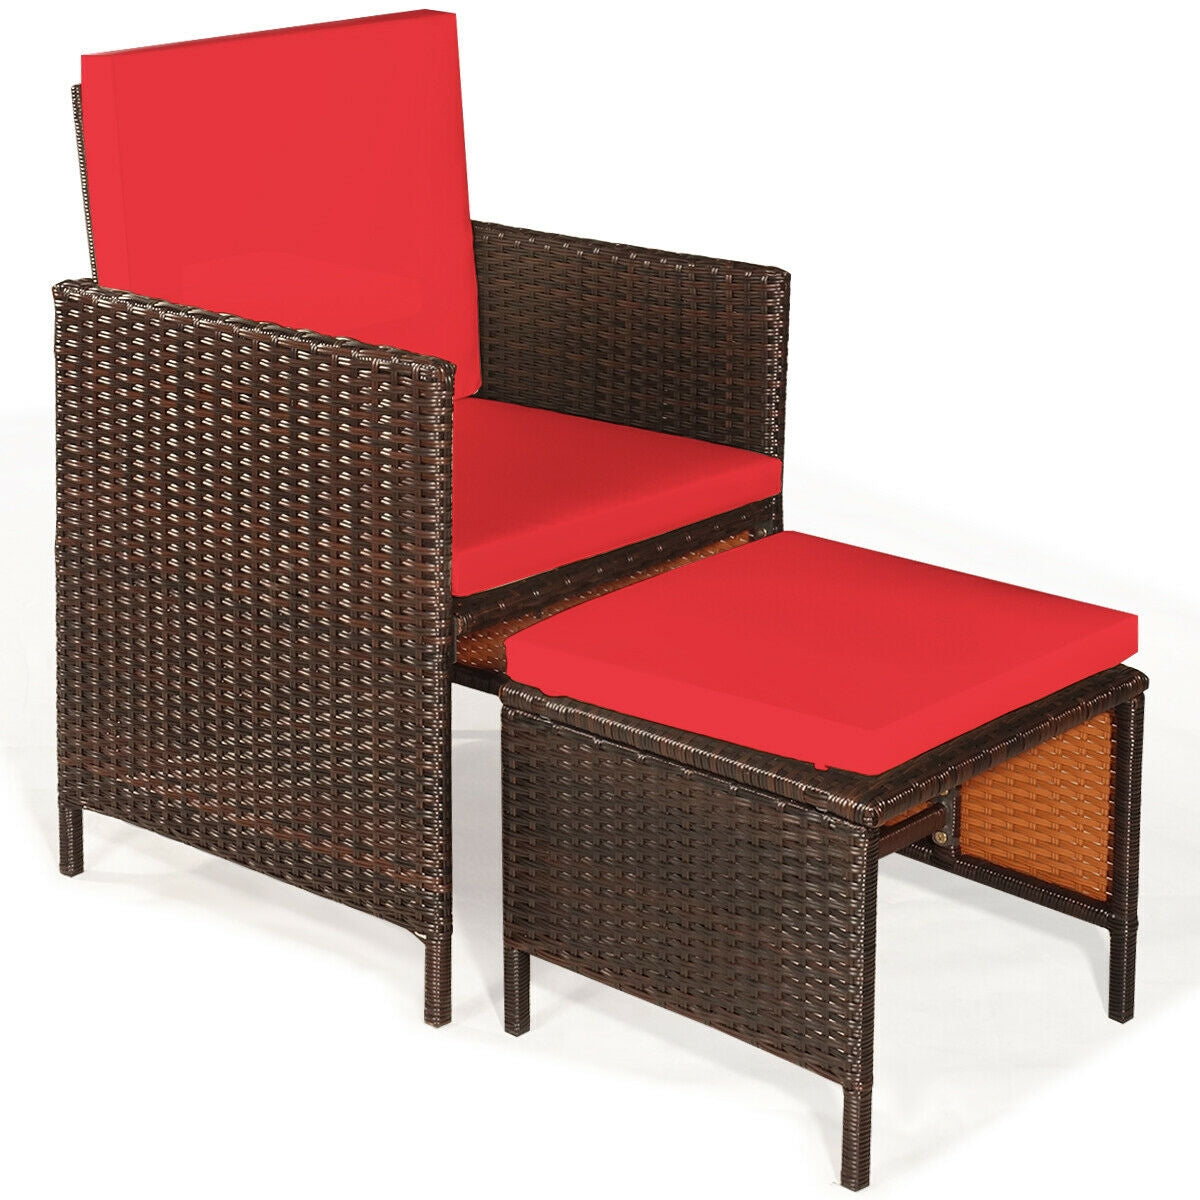 9PCS Patio Rattan Dining Cushioned Chairs Set-Red